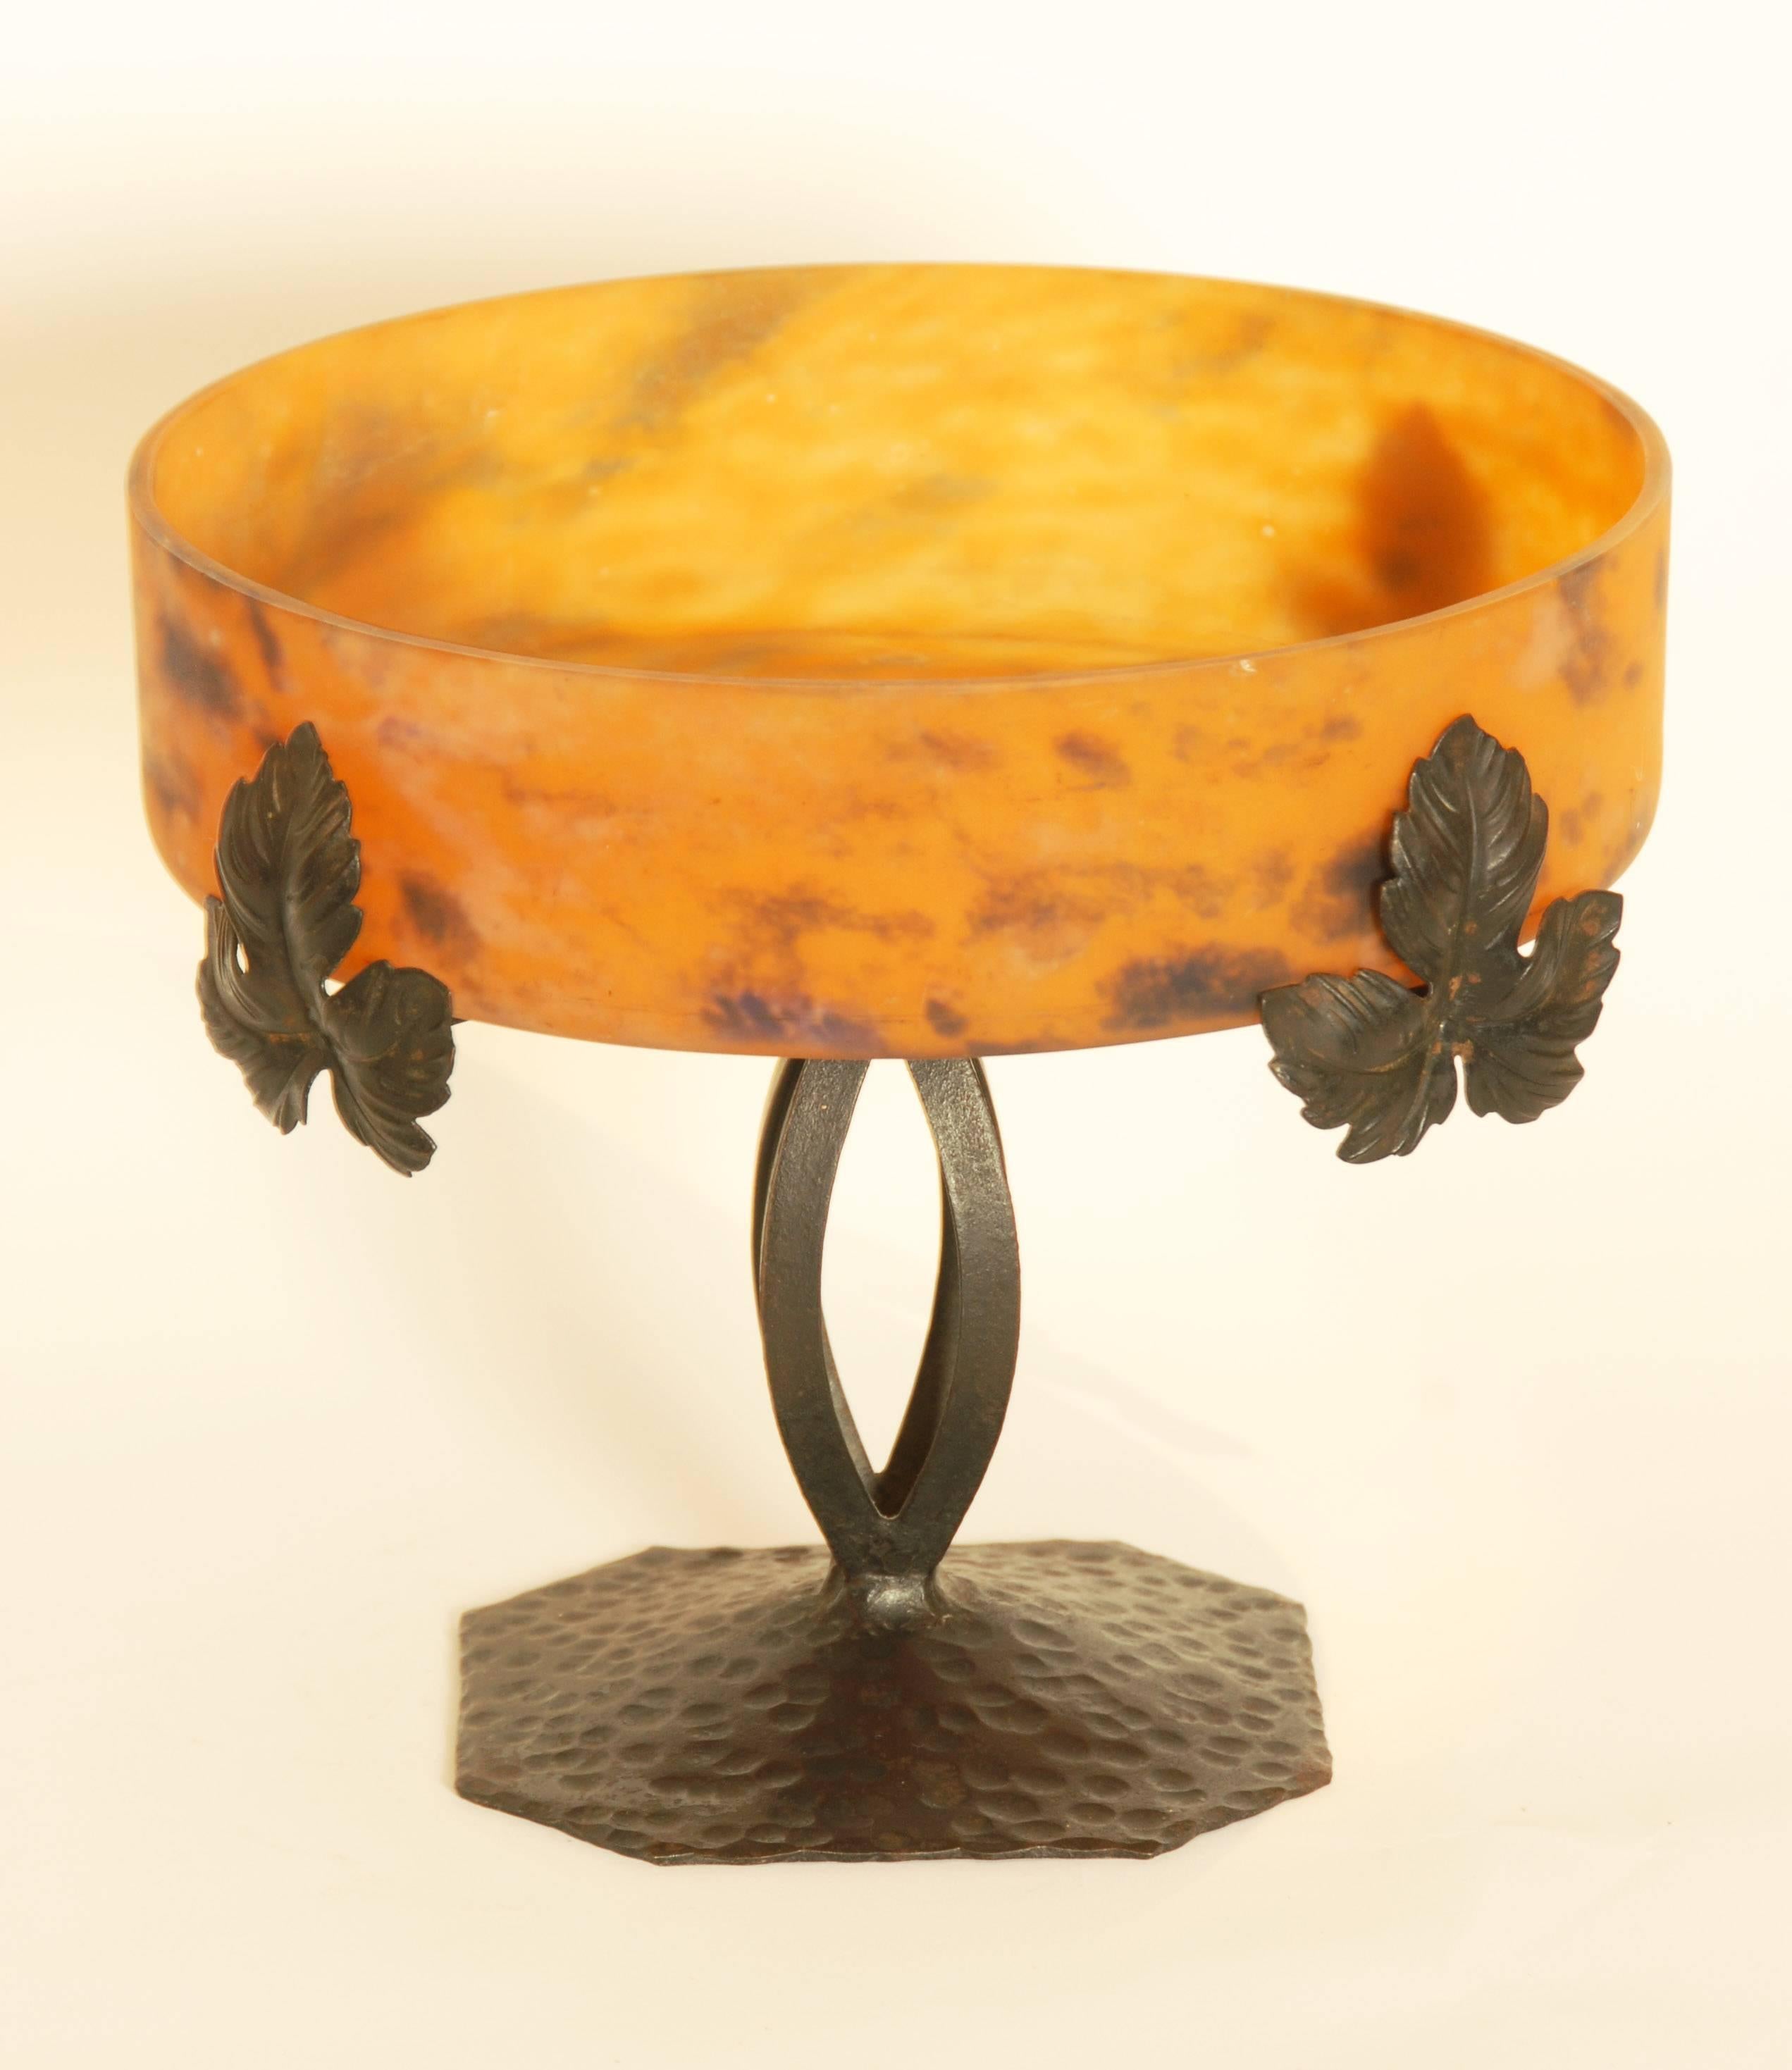 Art Deco Pate de Vere glass dish on black metal stand.
The glass is indistinctly signed.